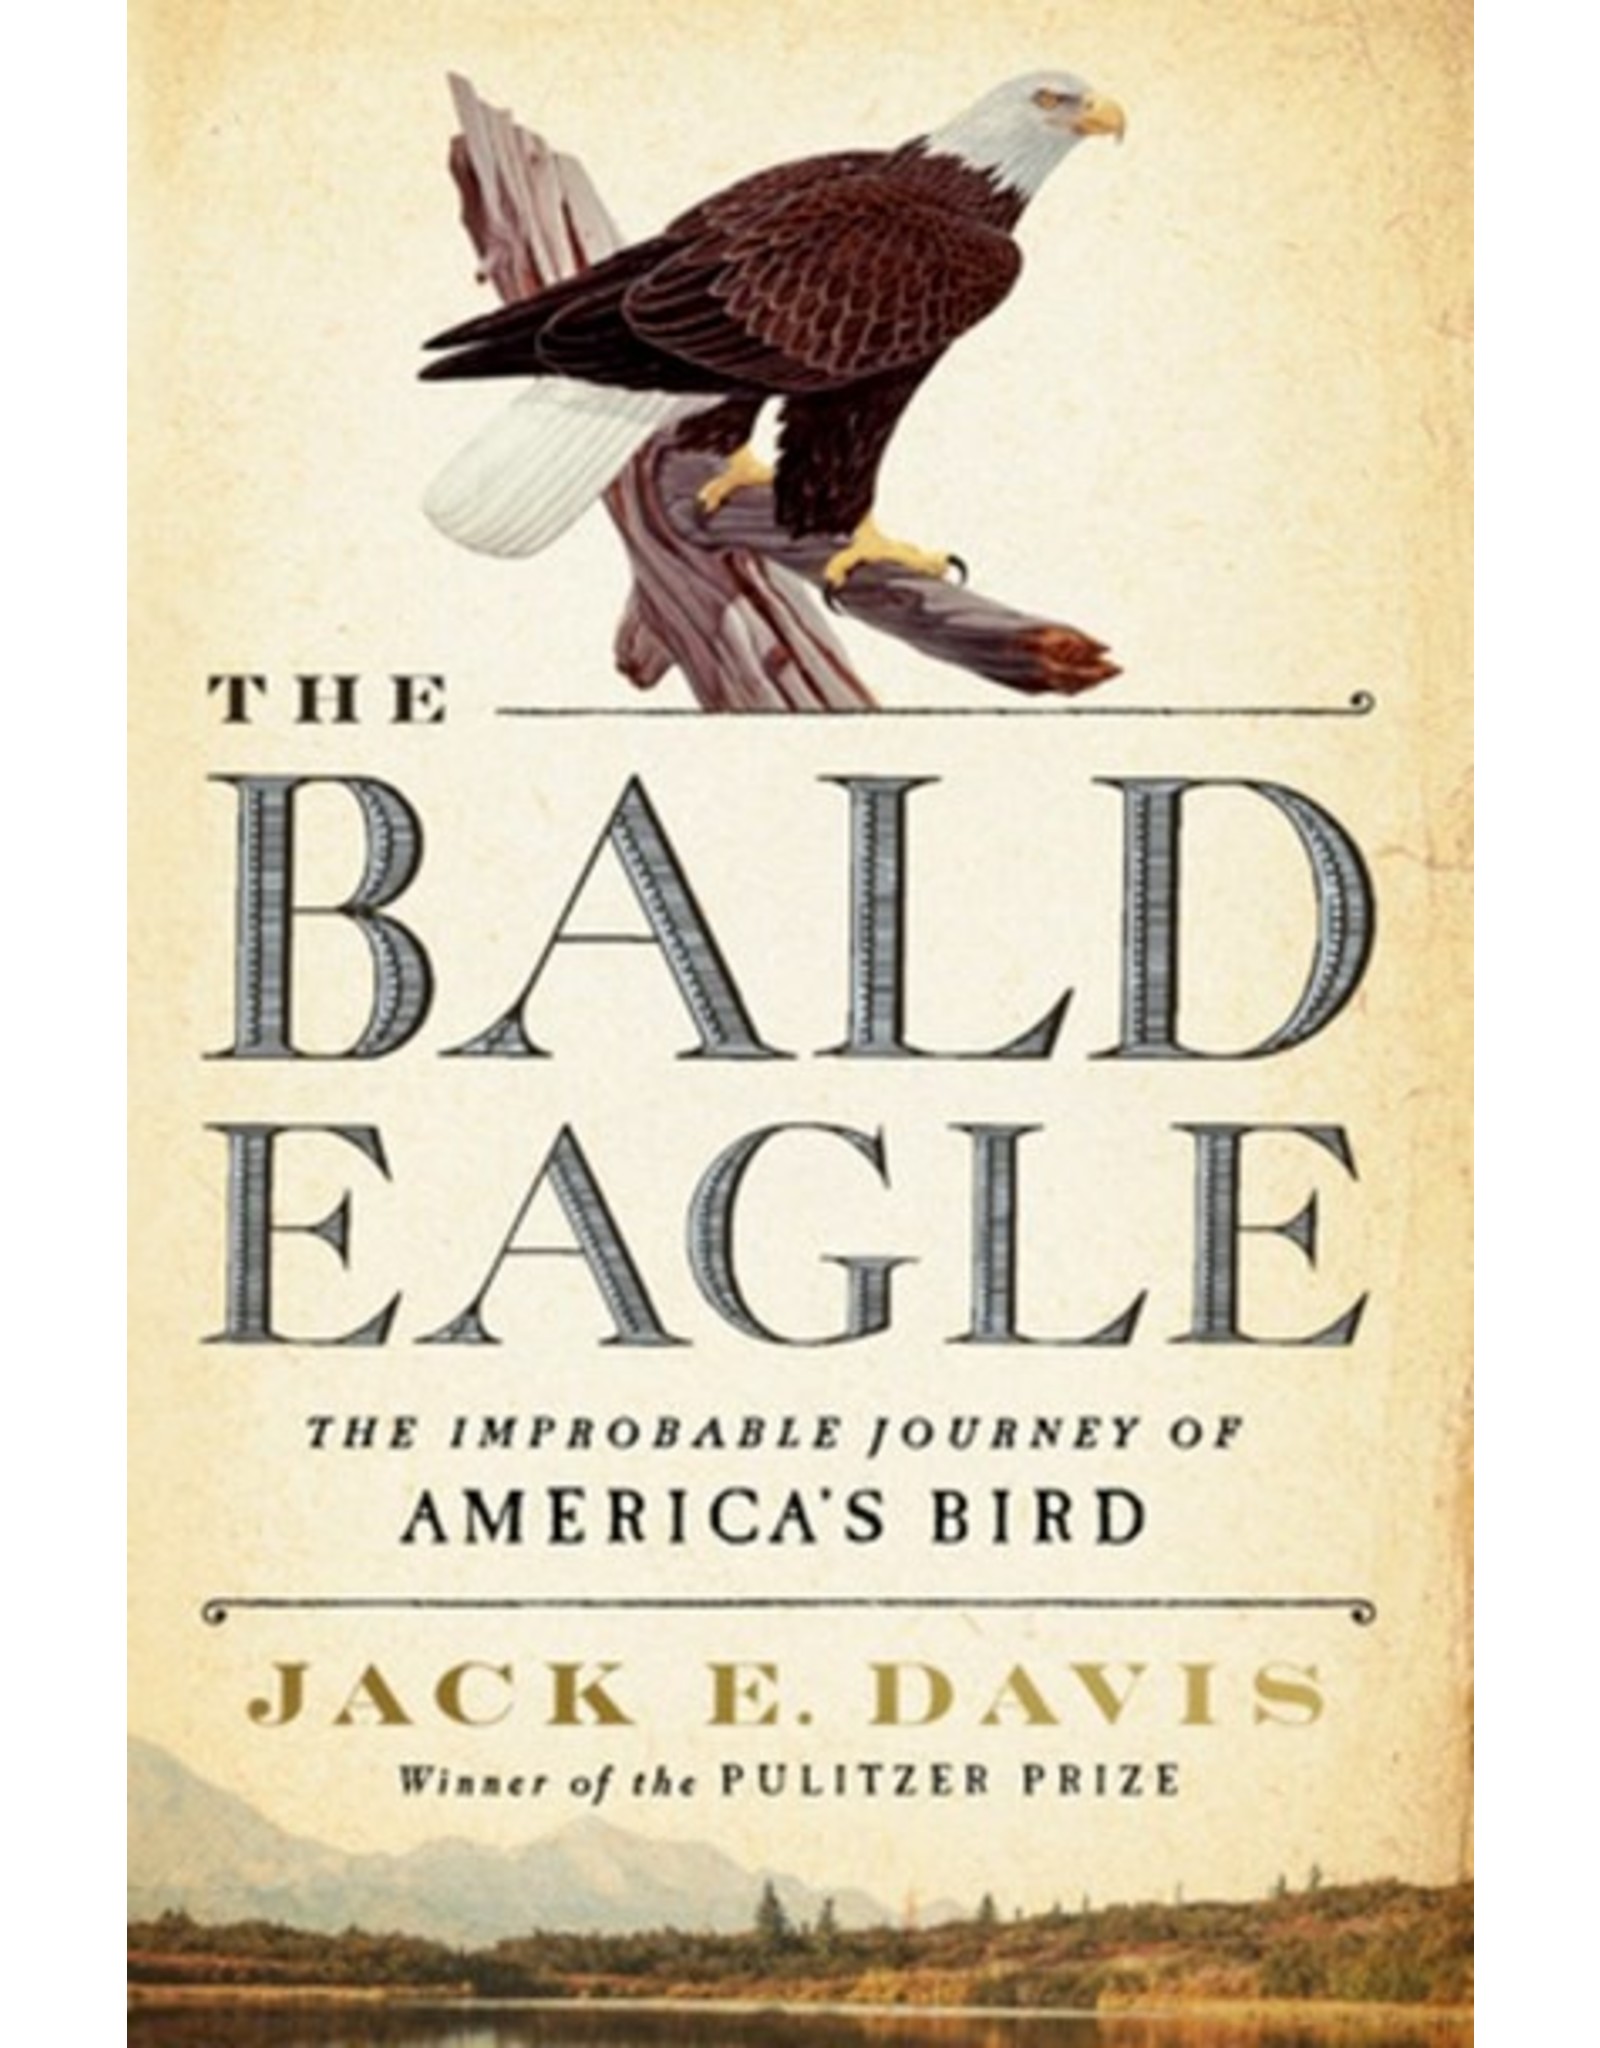 Books The Bald Eagle : The Improbable Journey of America's Bird by Jack E. Davis